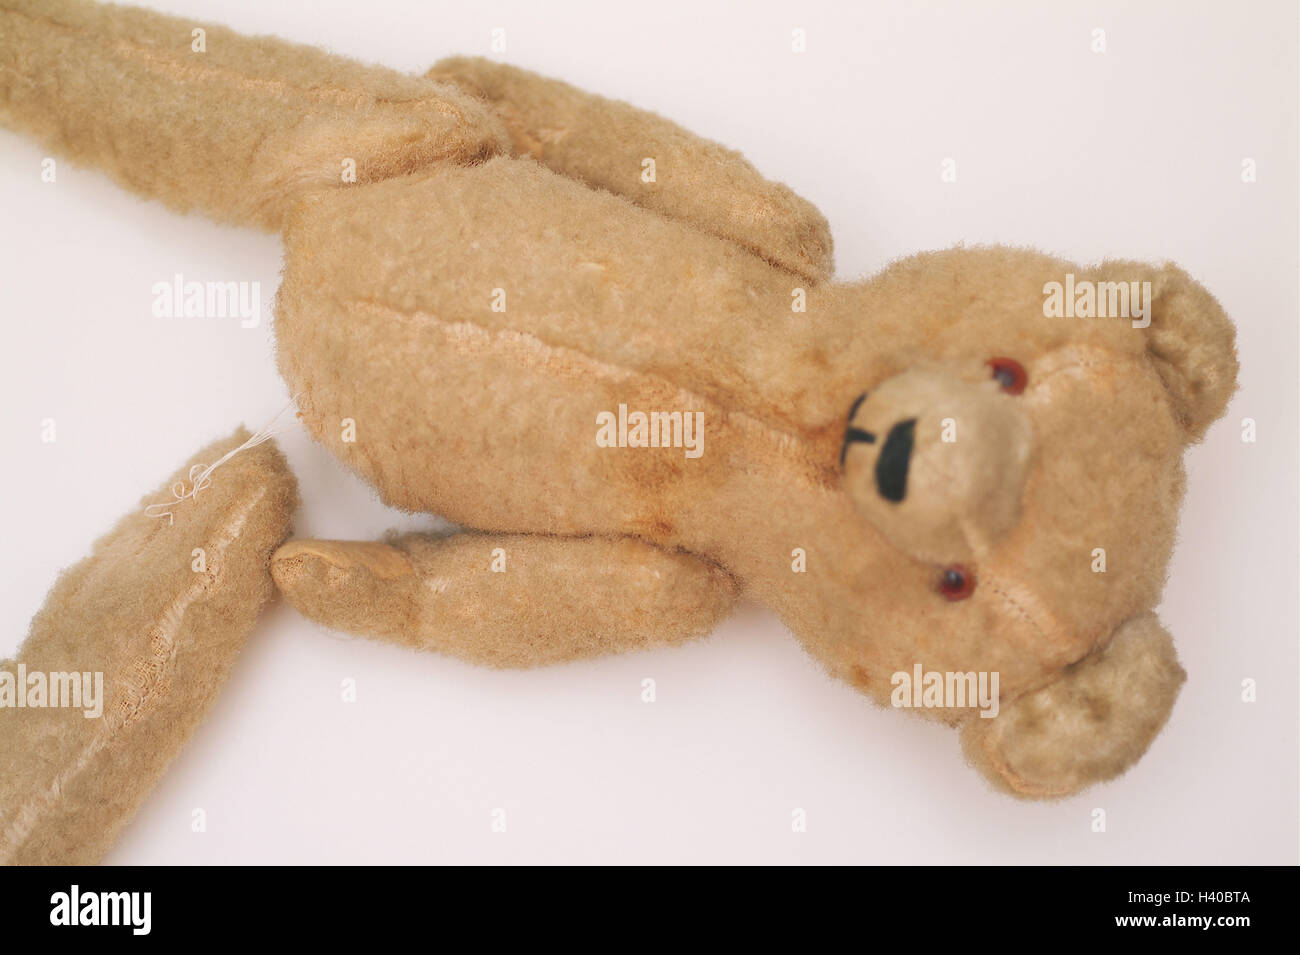 Soft toy, teddy bear, broken, bone loose, toys, soft animal, nonsense animal, soft toy, Teddy, Stoffteddy bear, nostalgically, old, uses, worn-out, discarded, forget, lie, foot laxly, hang away, damage, defective, defectively, broken, ruins, recollection, Stock Photo